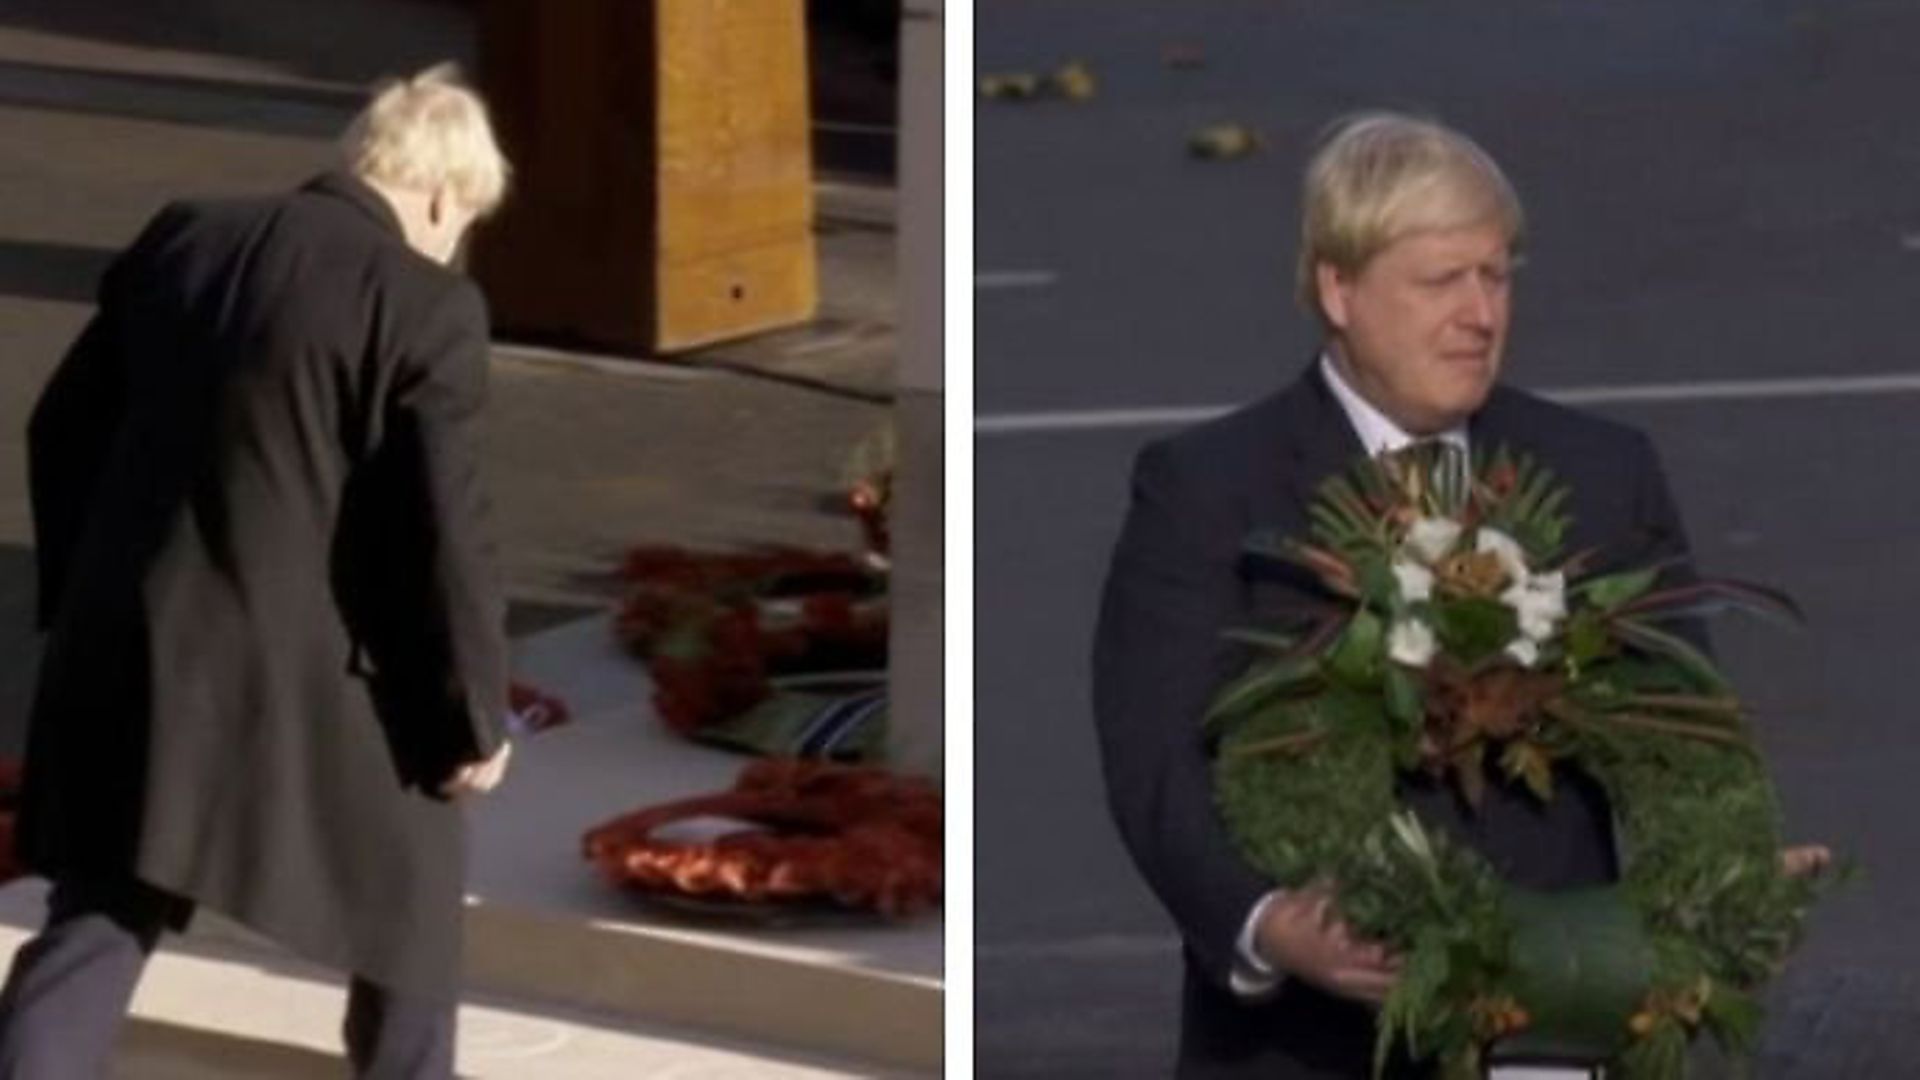 A production blunder was blamed for the mistake, however some have suggested the decision to used archival footage from 2016 was a deliberate attempt to cover up the prime minister's mistake. Photo: BBC - Credit: Archant